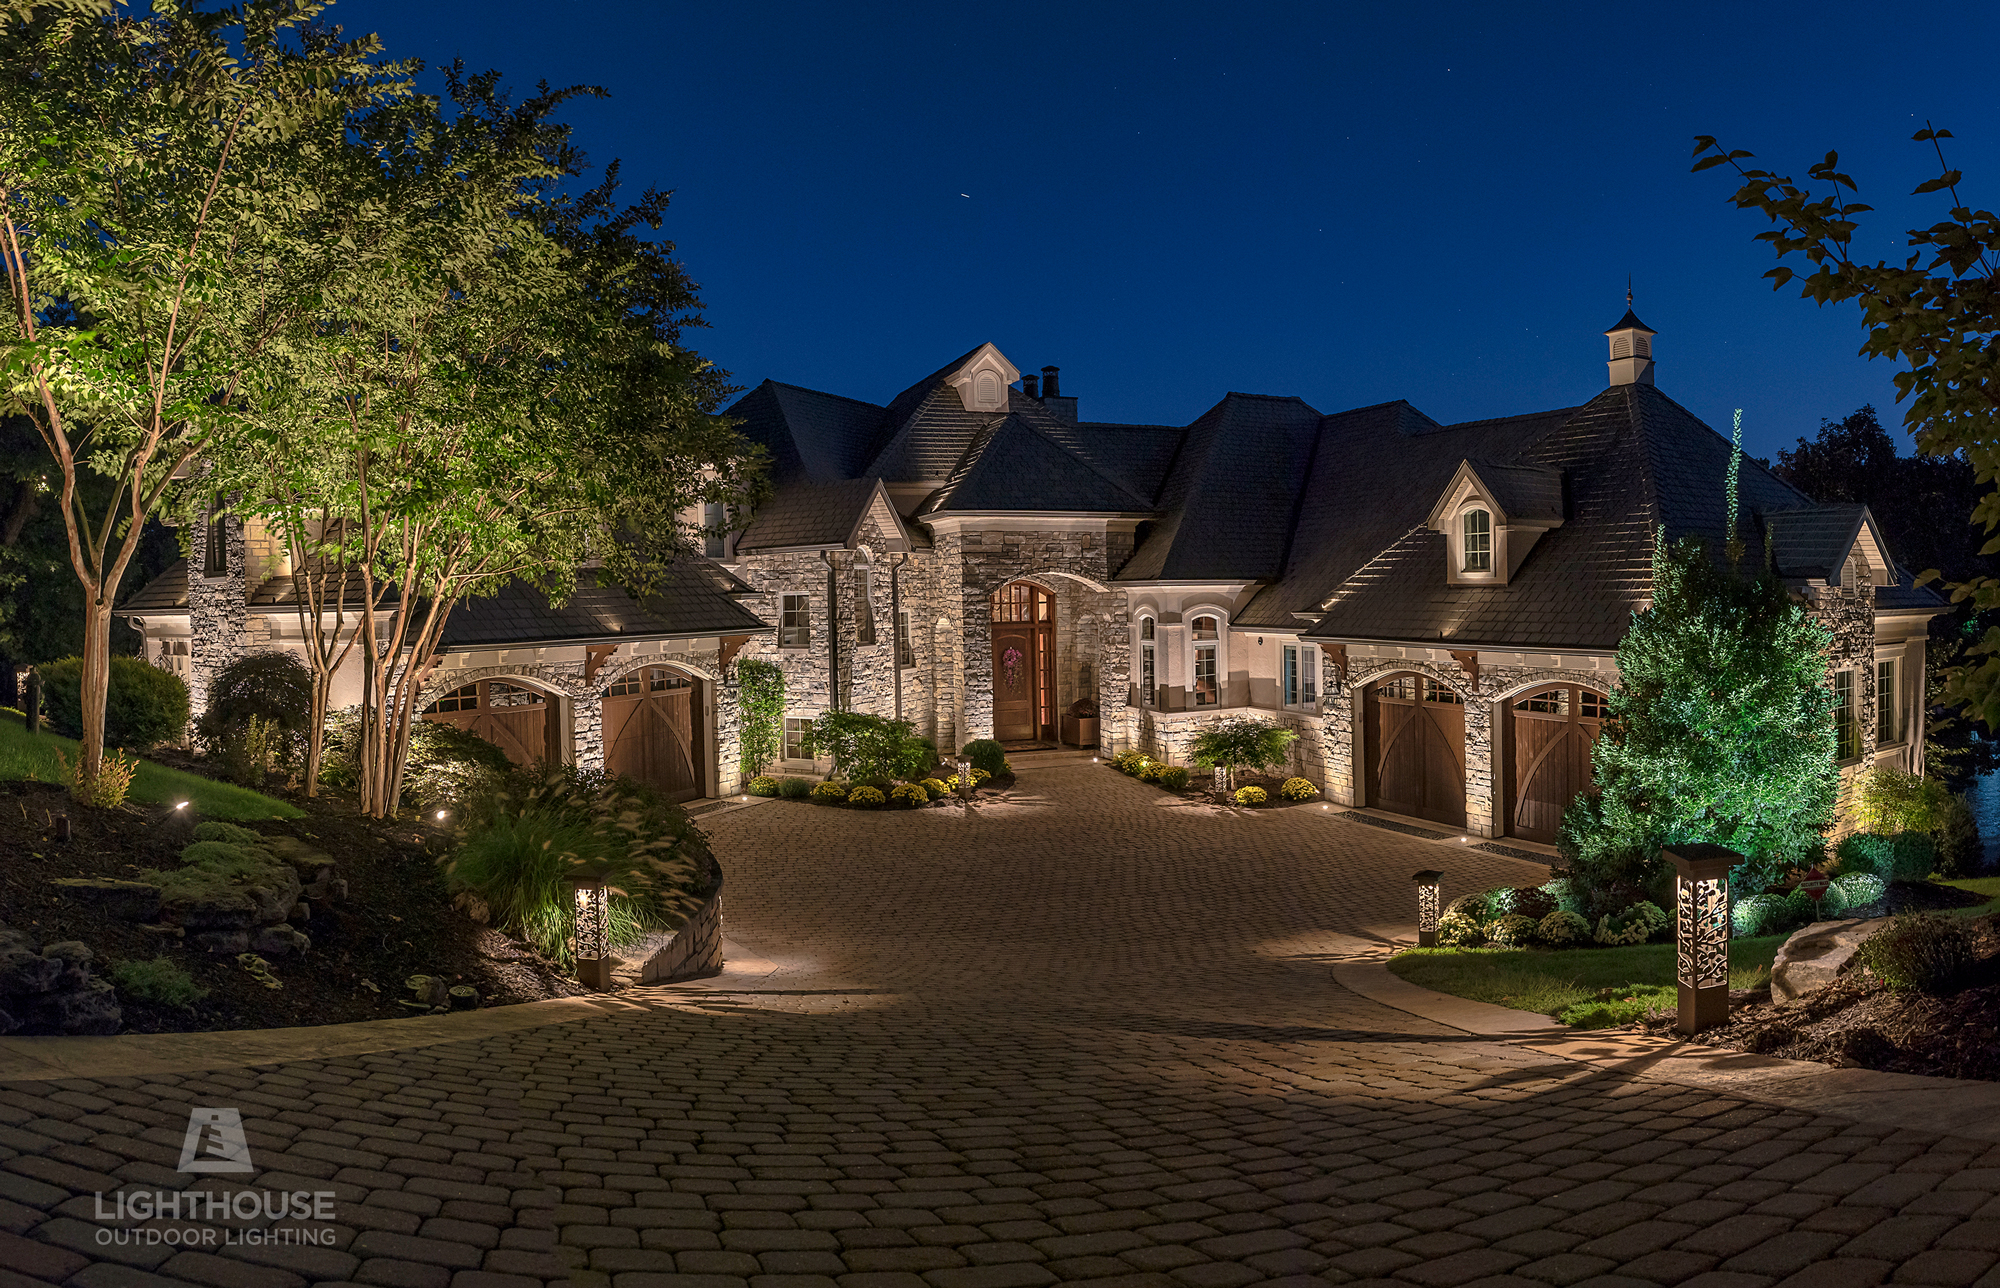 Driveway lighting in Sevier County, TN